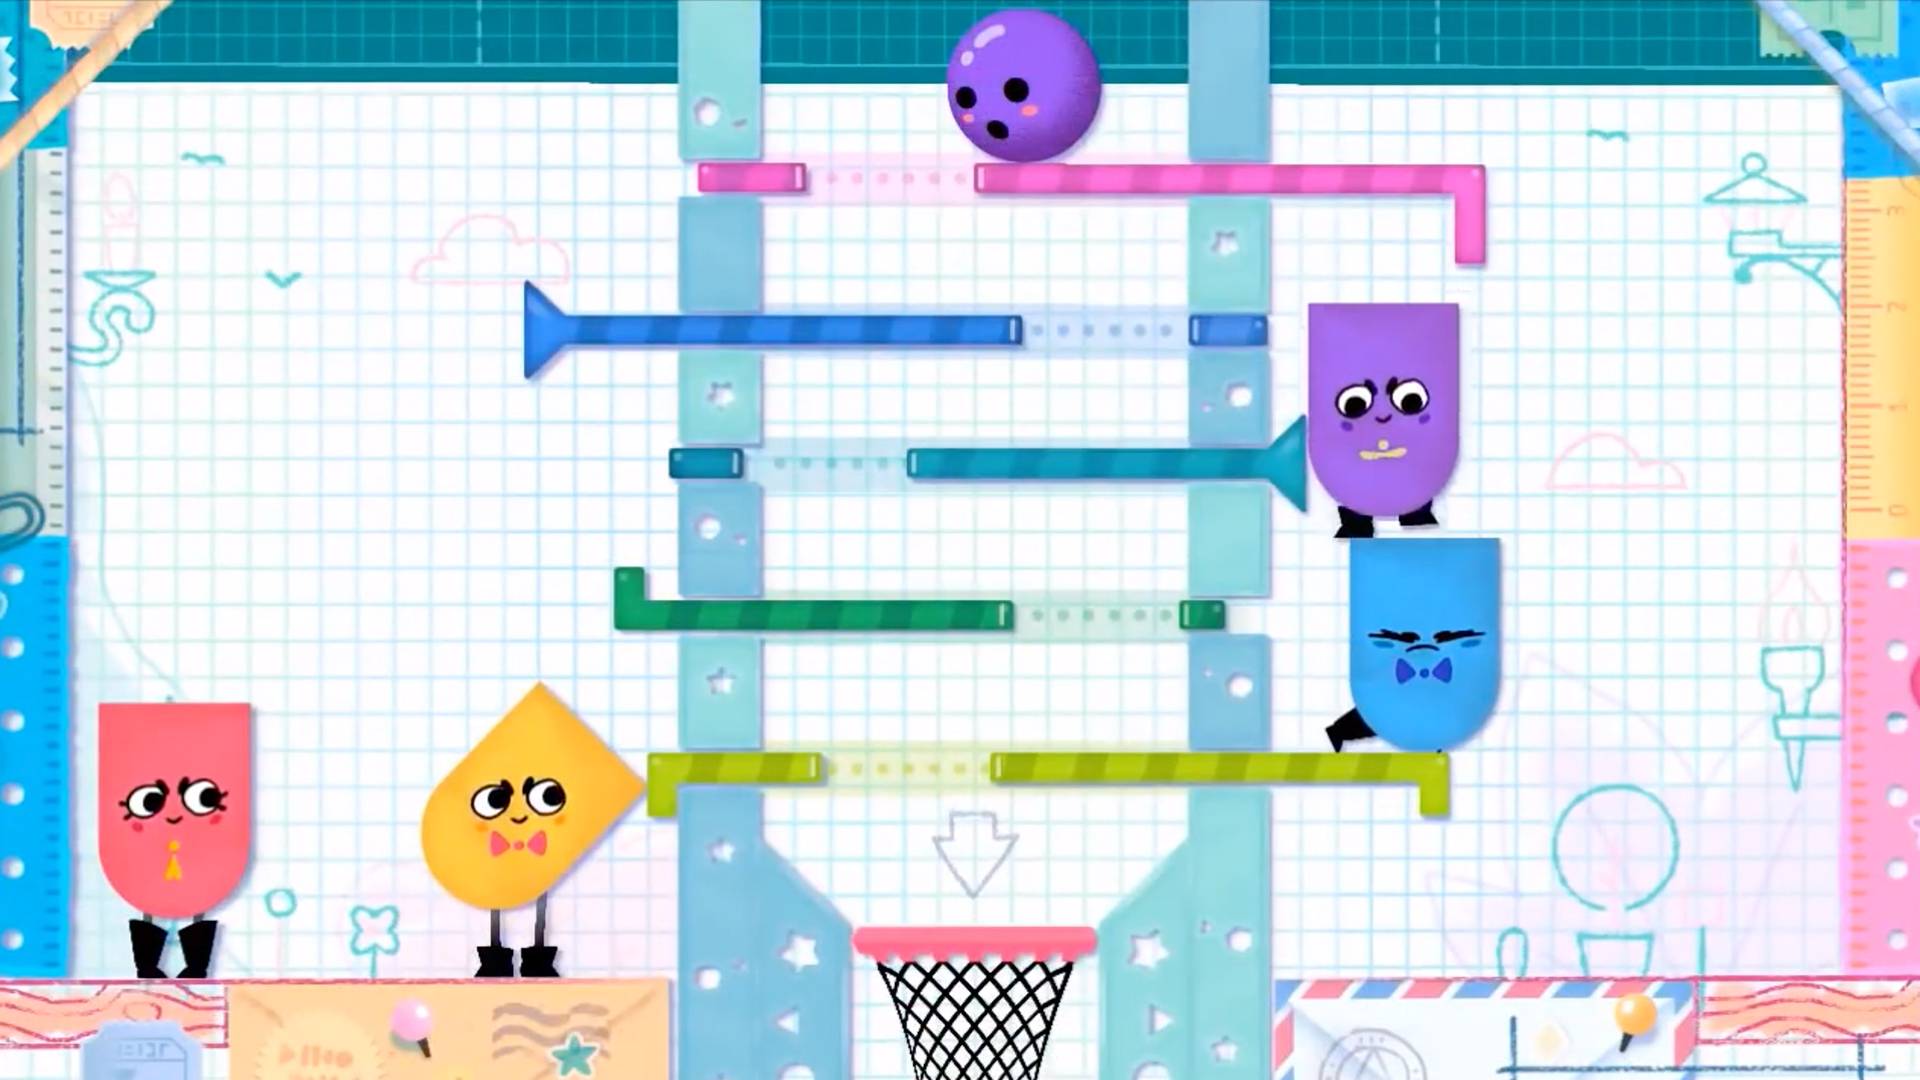 Game: Snipperclips Review